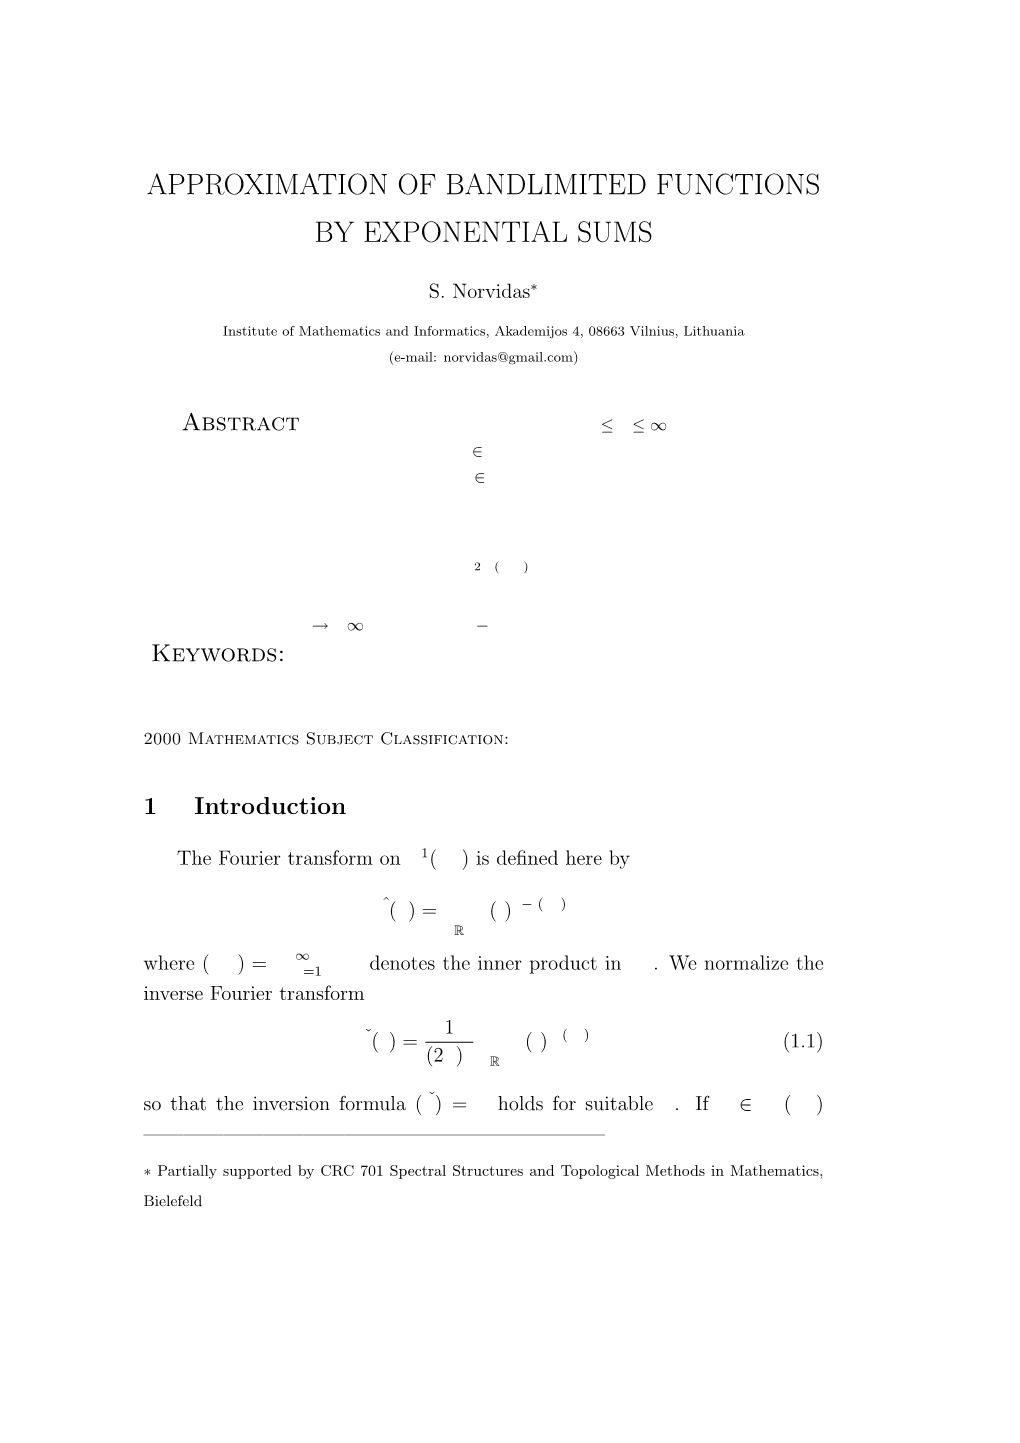 Approximation of Bandlimited Functions by Exponential Sums